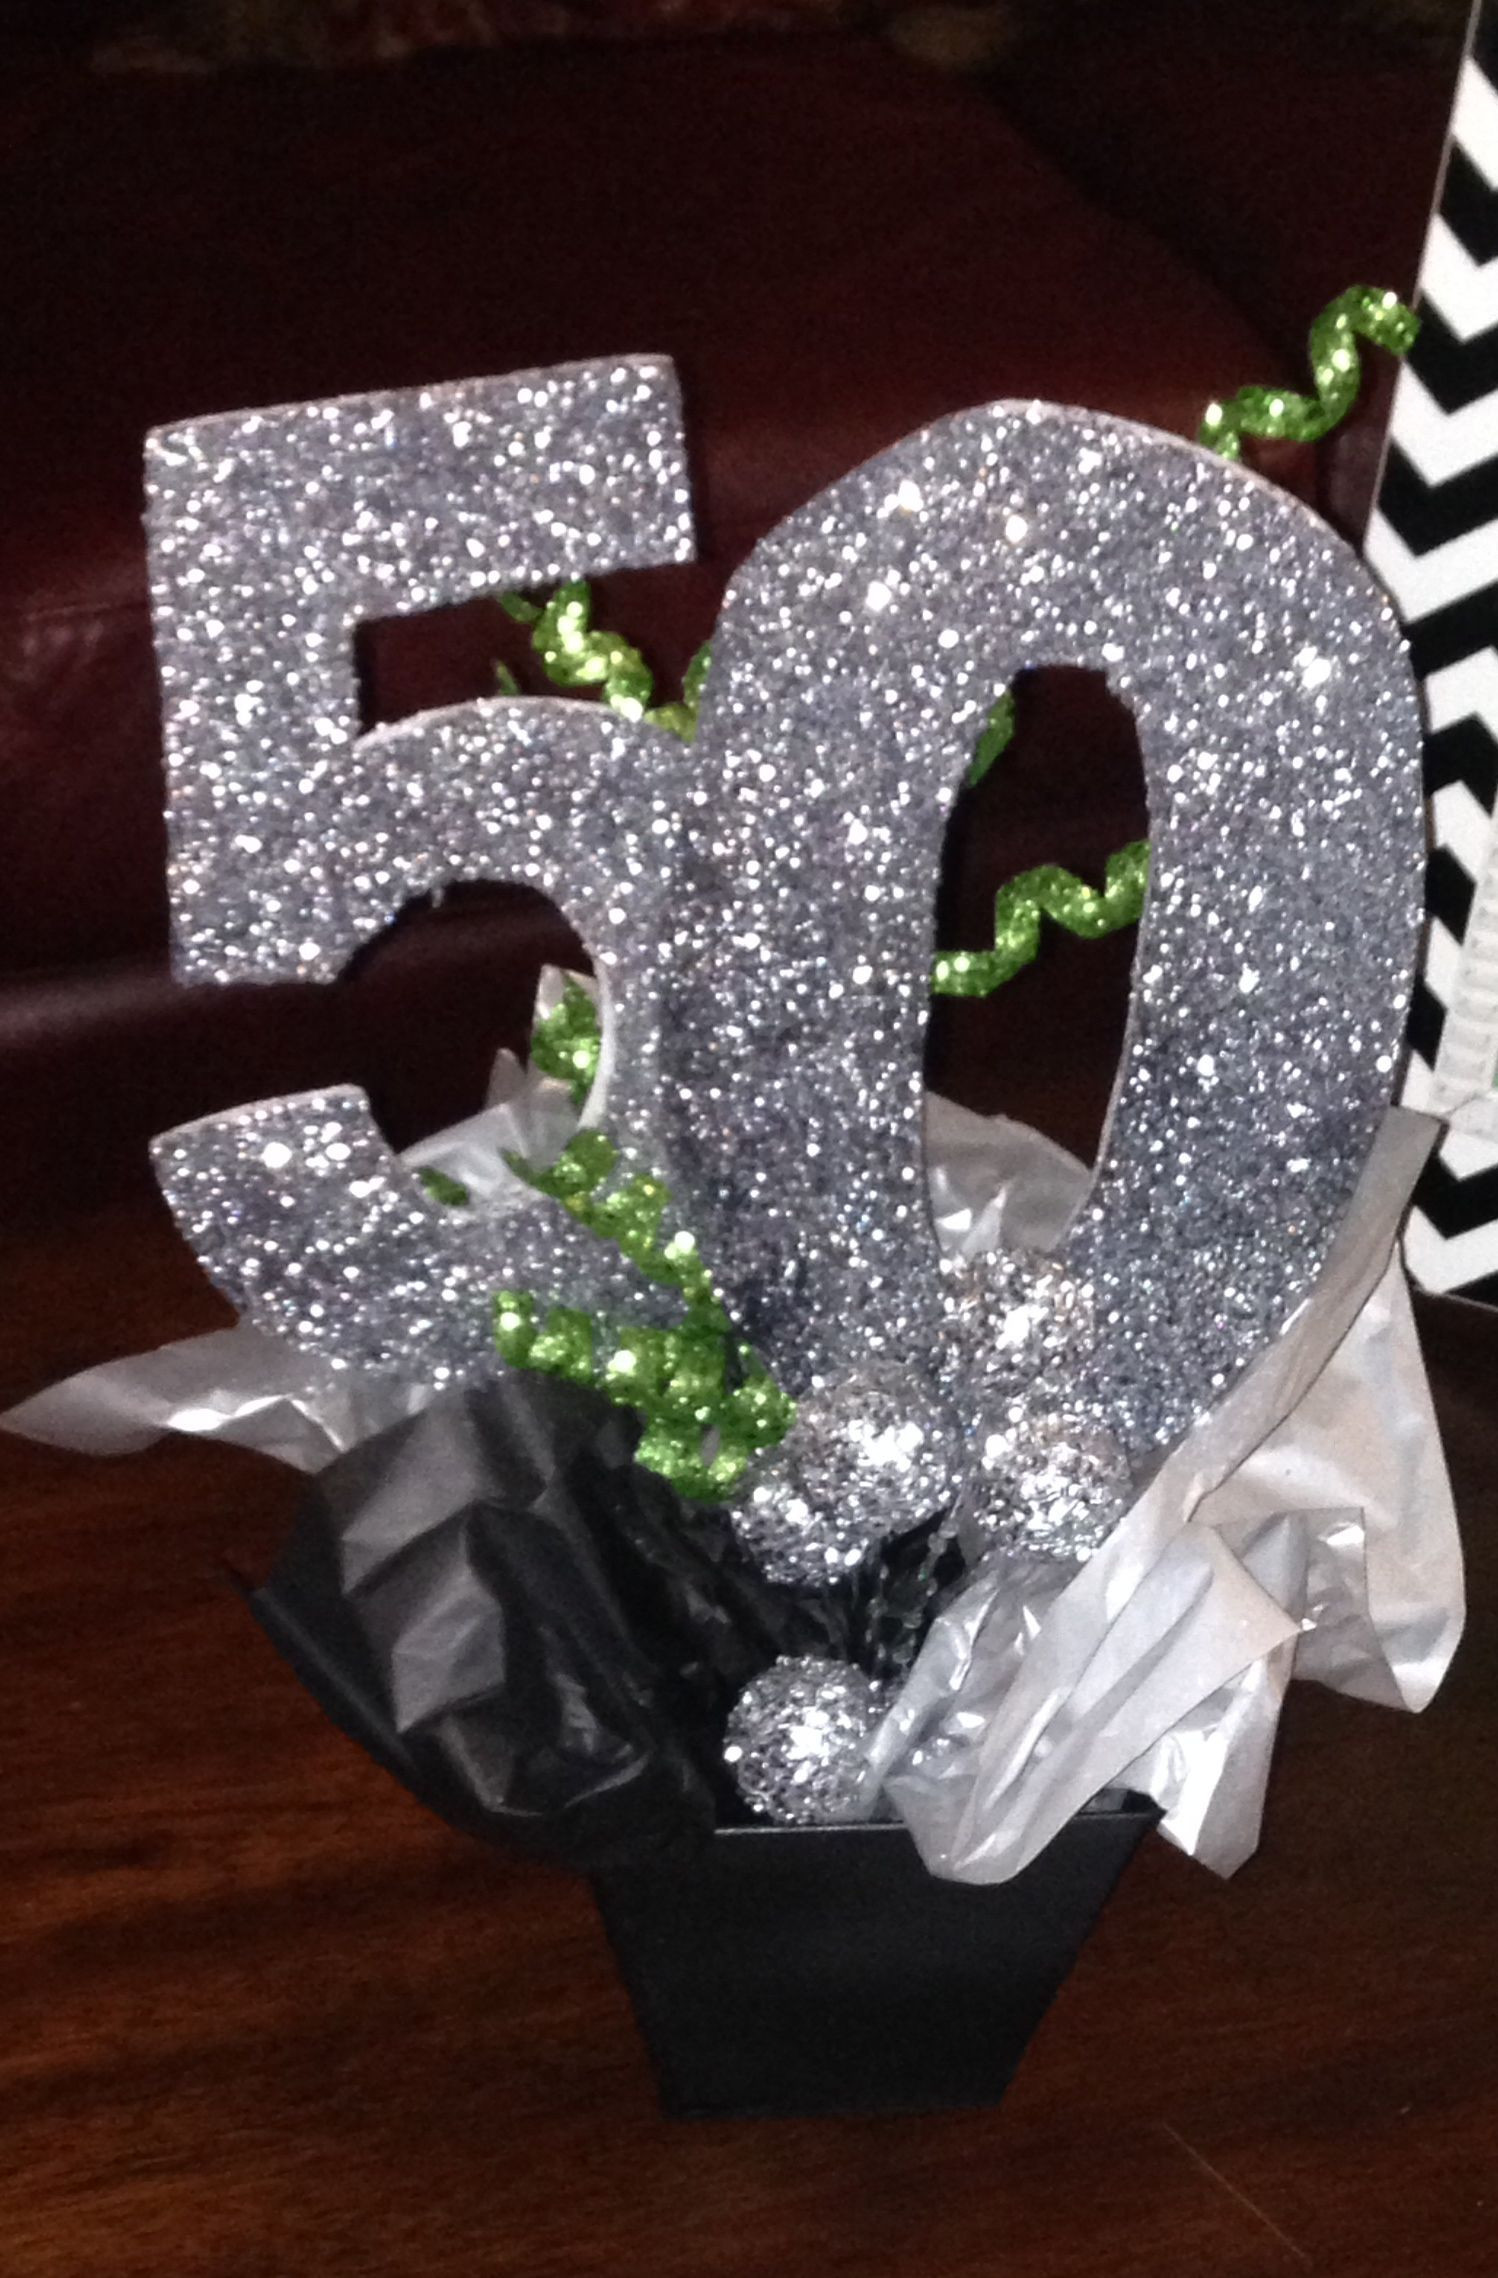 10 Lovable Glitter High Heel Bud Vase 2024 free download glitter high heel bud vase of sparkly silver 50th birthday party centerpiece follow us for more in sparkly silver 50th birthday party centerpiece follow us for more planning inspiration or c